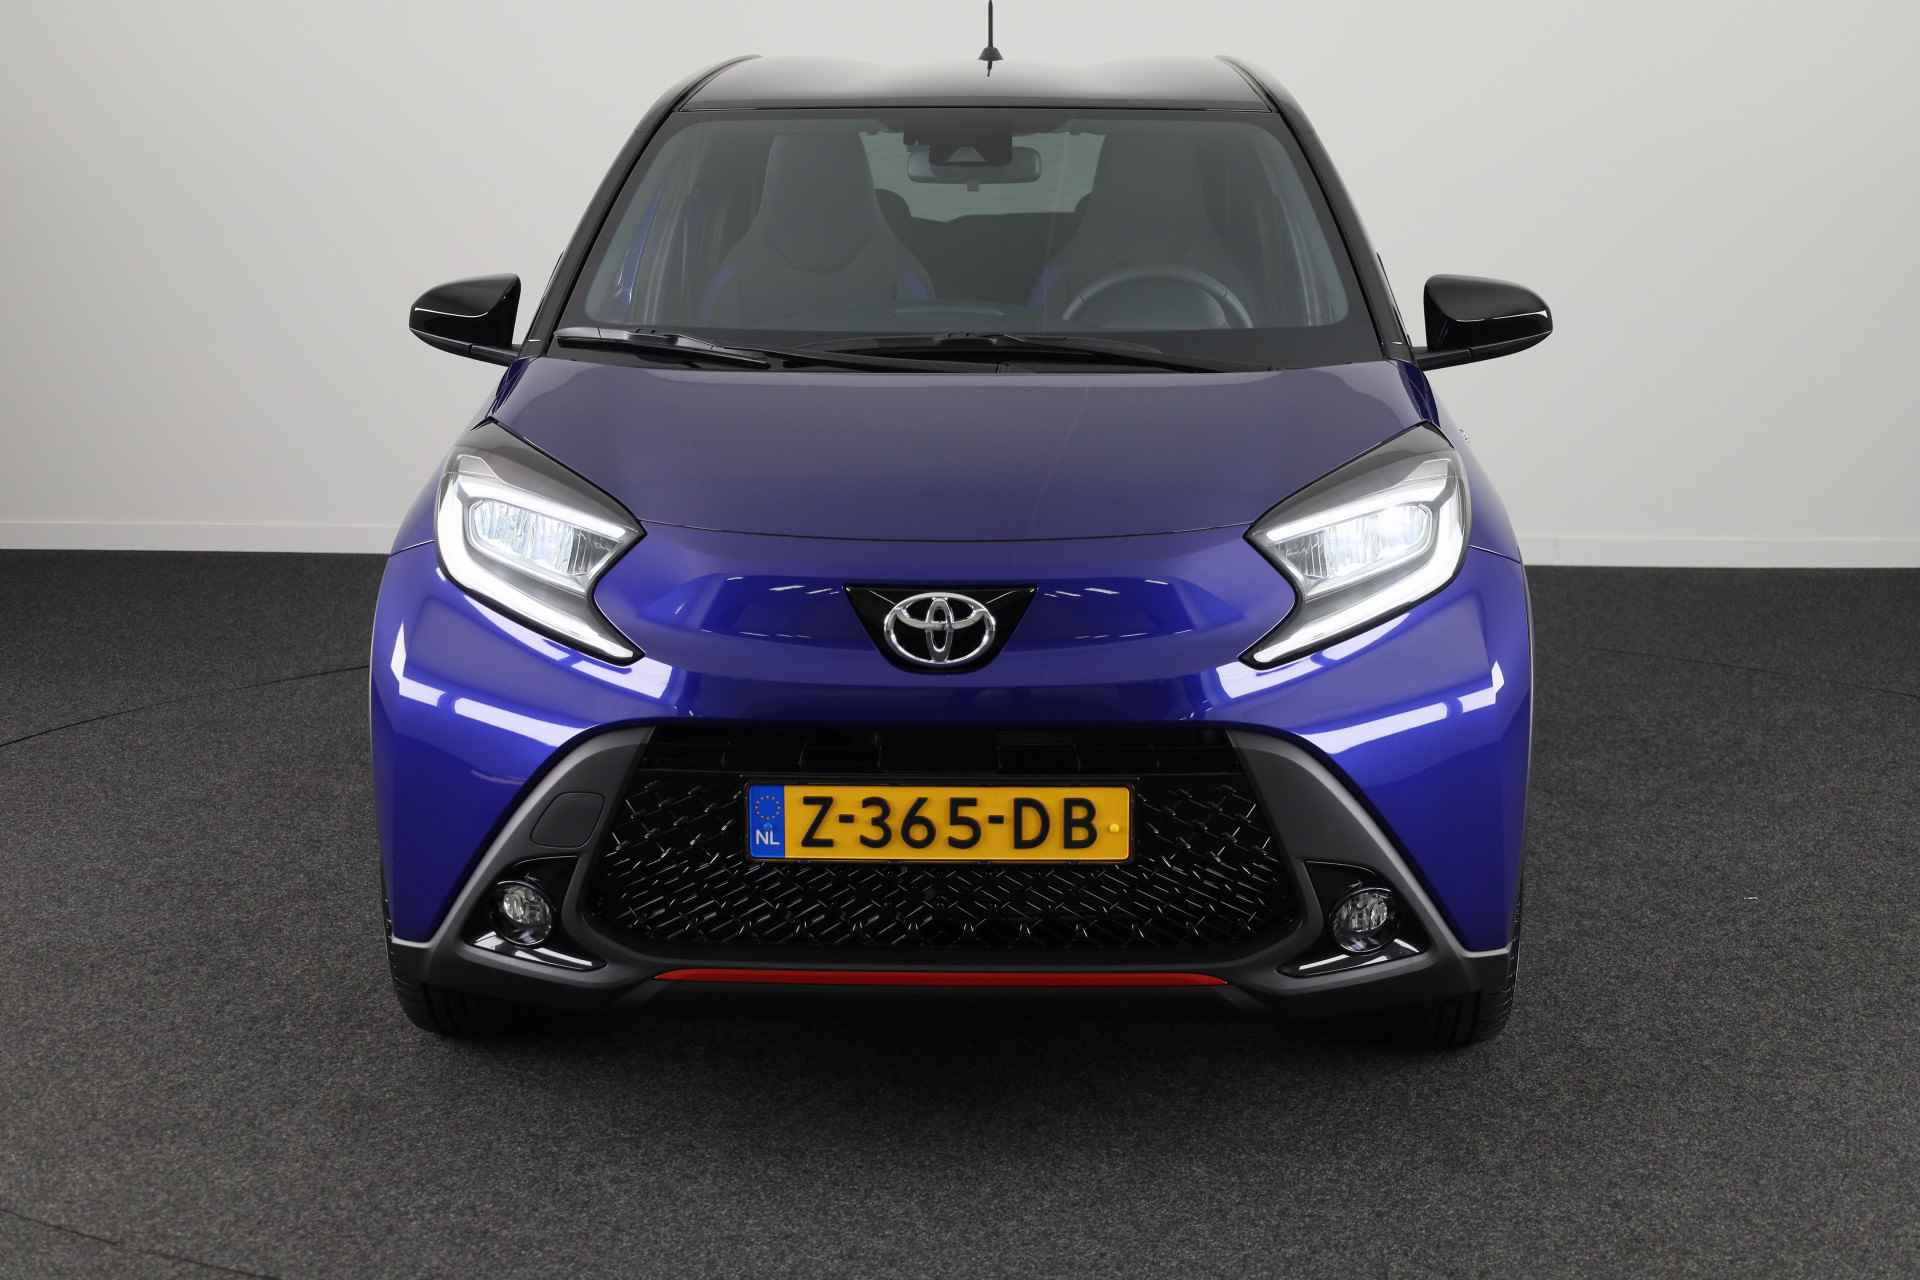 Toyota Aygo X 1.0 VVT-i S-CVT Automaat Pulse *Demo* | LED Verlichting | Climate Control | - 16/36